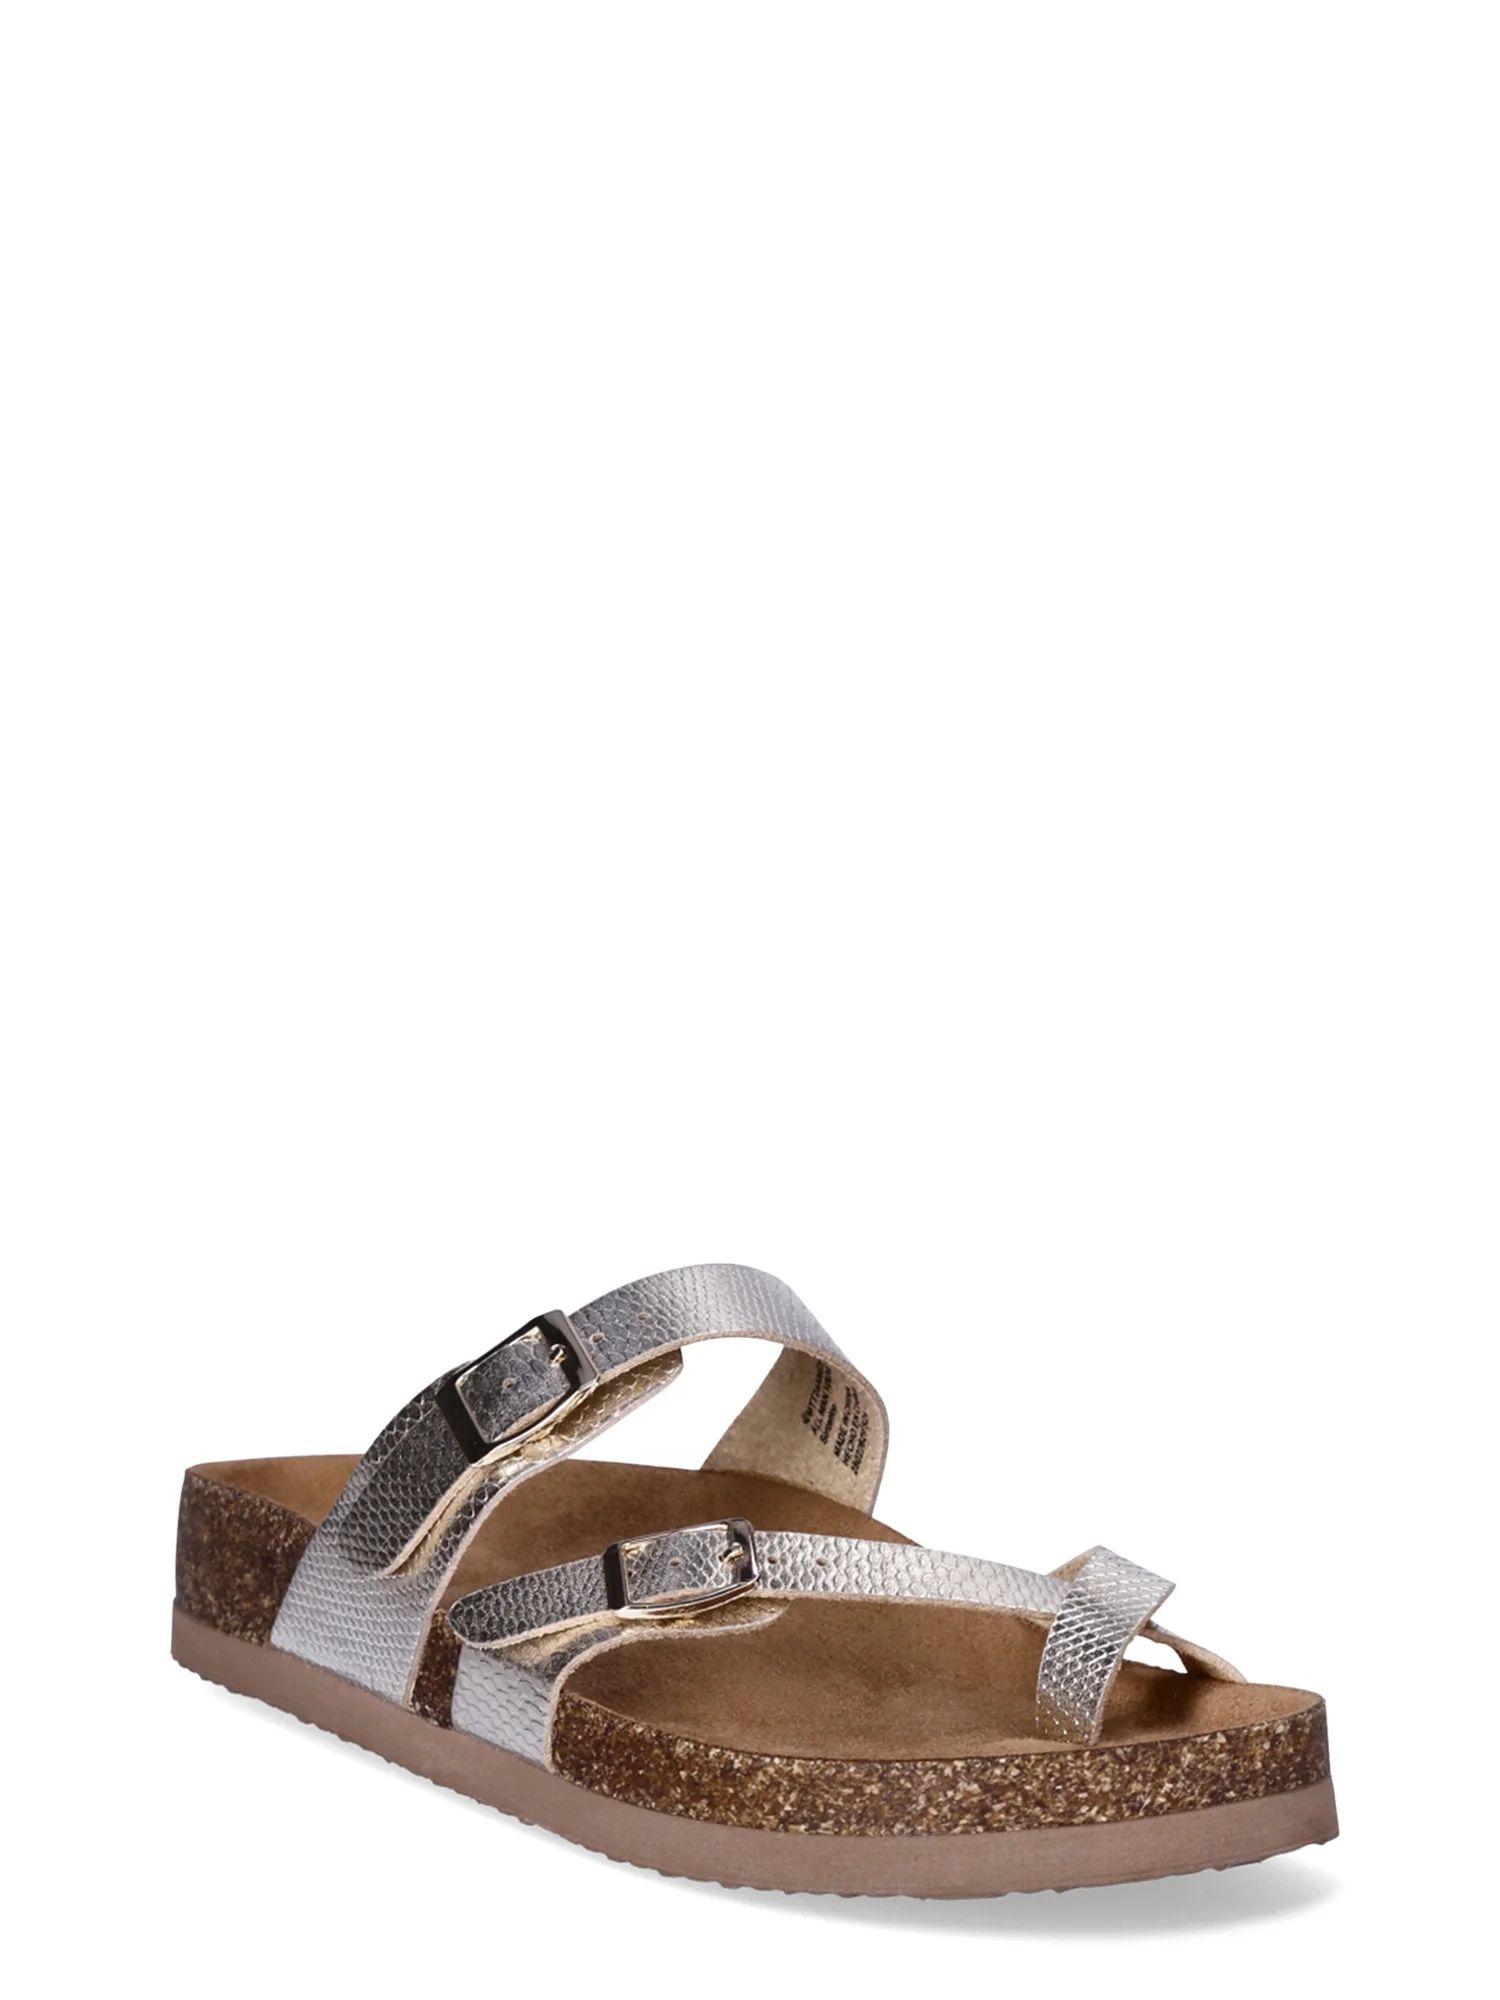 Time and Tru Women's Asymmetric Strap Footbed Sandals, Sizes 6-11, Wide Width Available | Walmart (US)